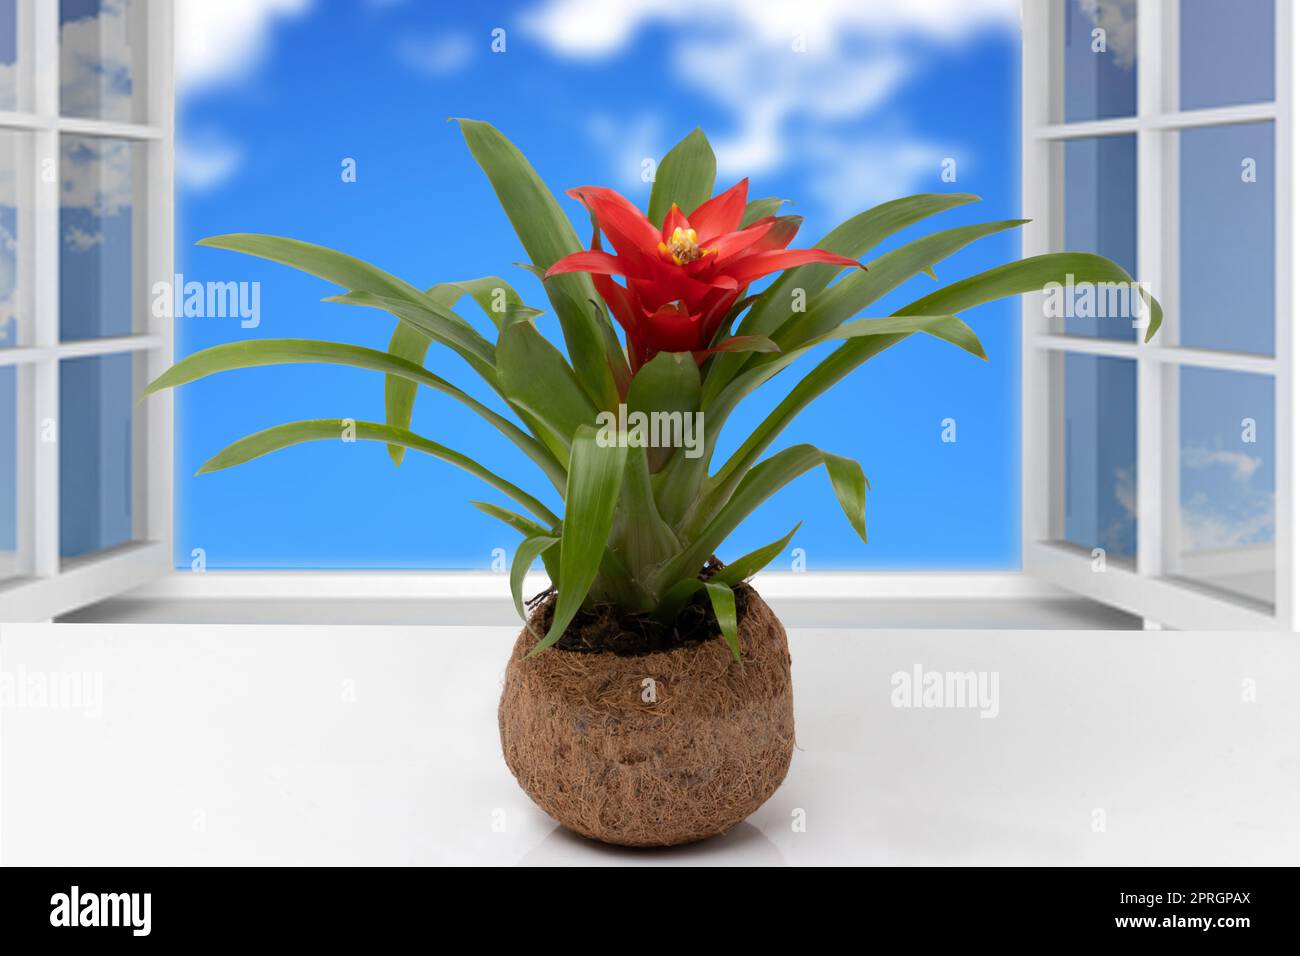 Closeup of a Bromeliad plant (Guzmania) in a coconut fiber pot on table  in front of open windows with an abstract blurred natural cloudy sky. Stock Photo